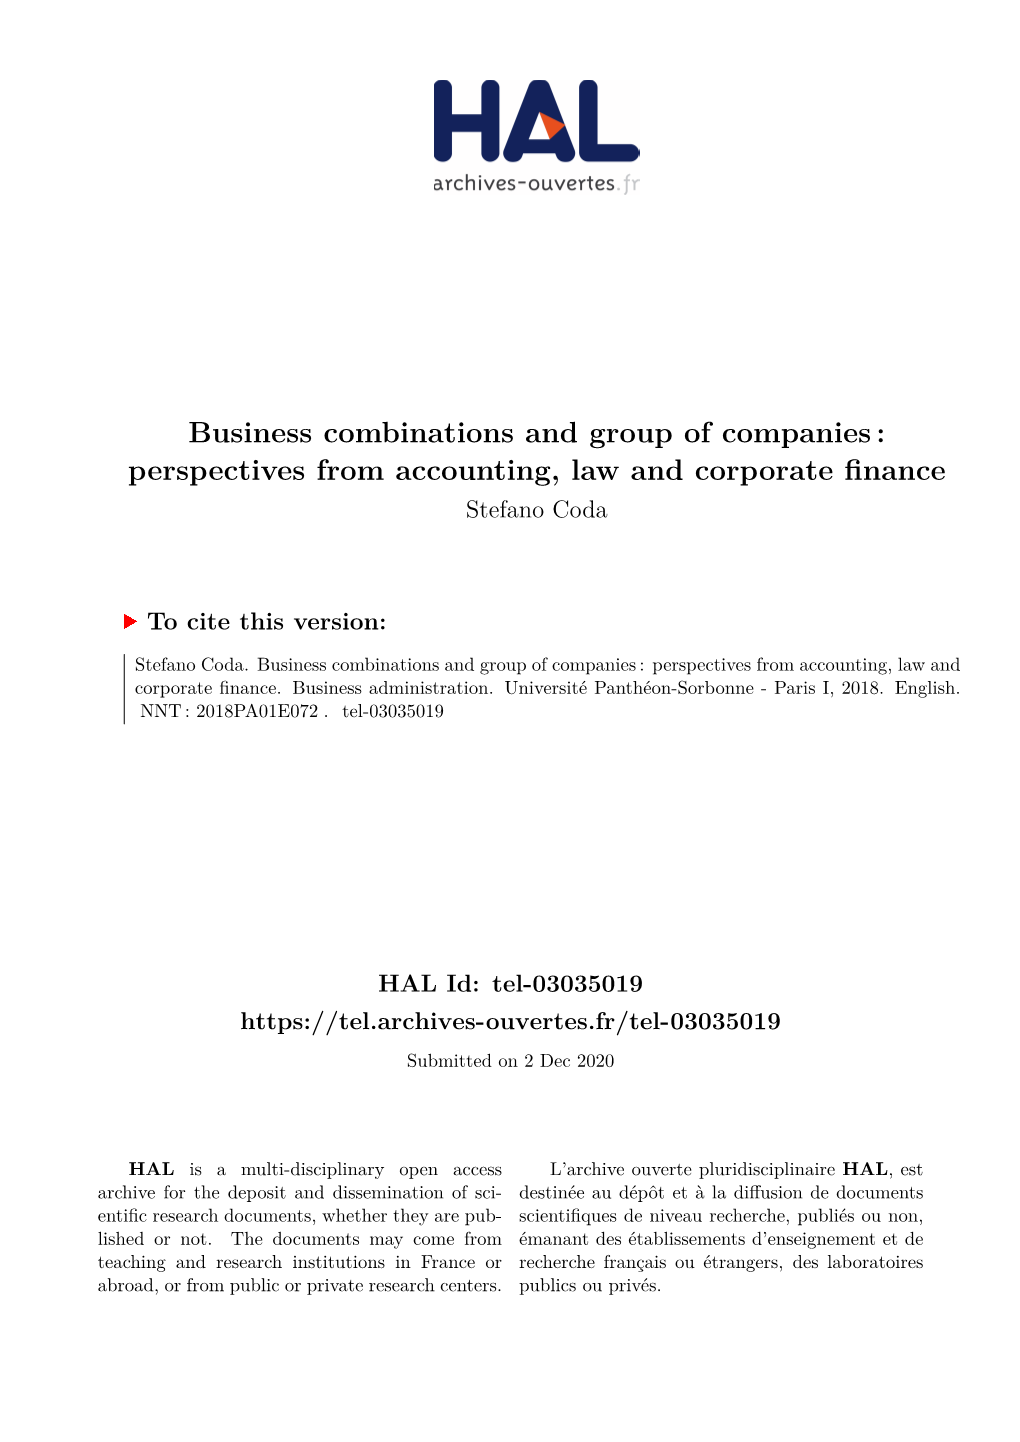 Business Combinations and Group of Companies: Perspectives from Accounting, Law and Corporate Finance